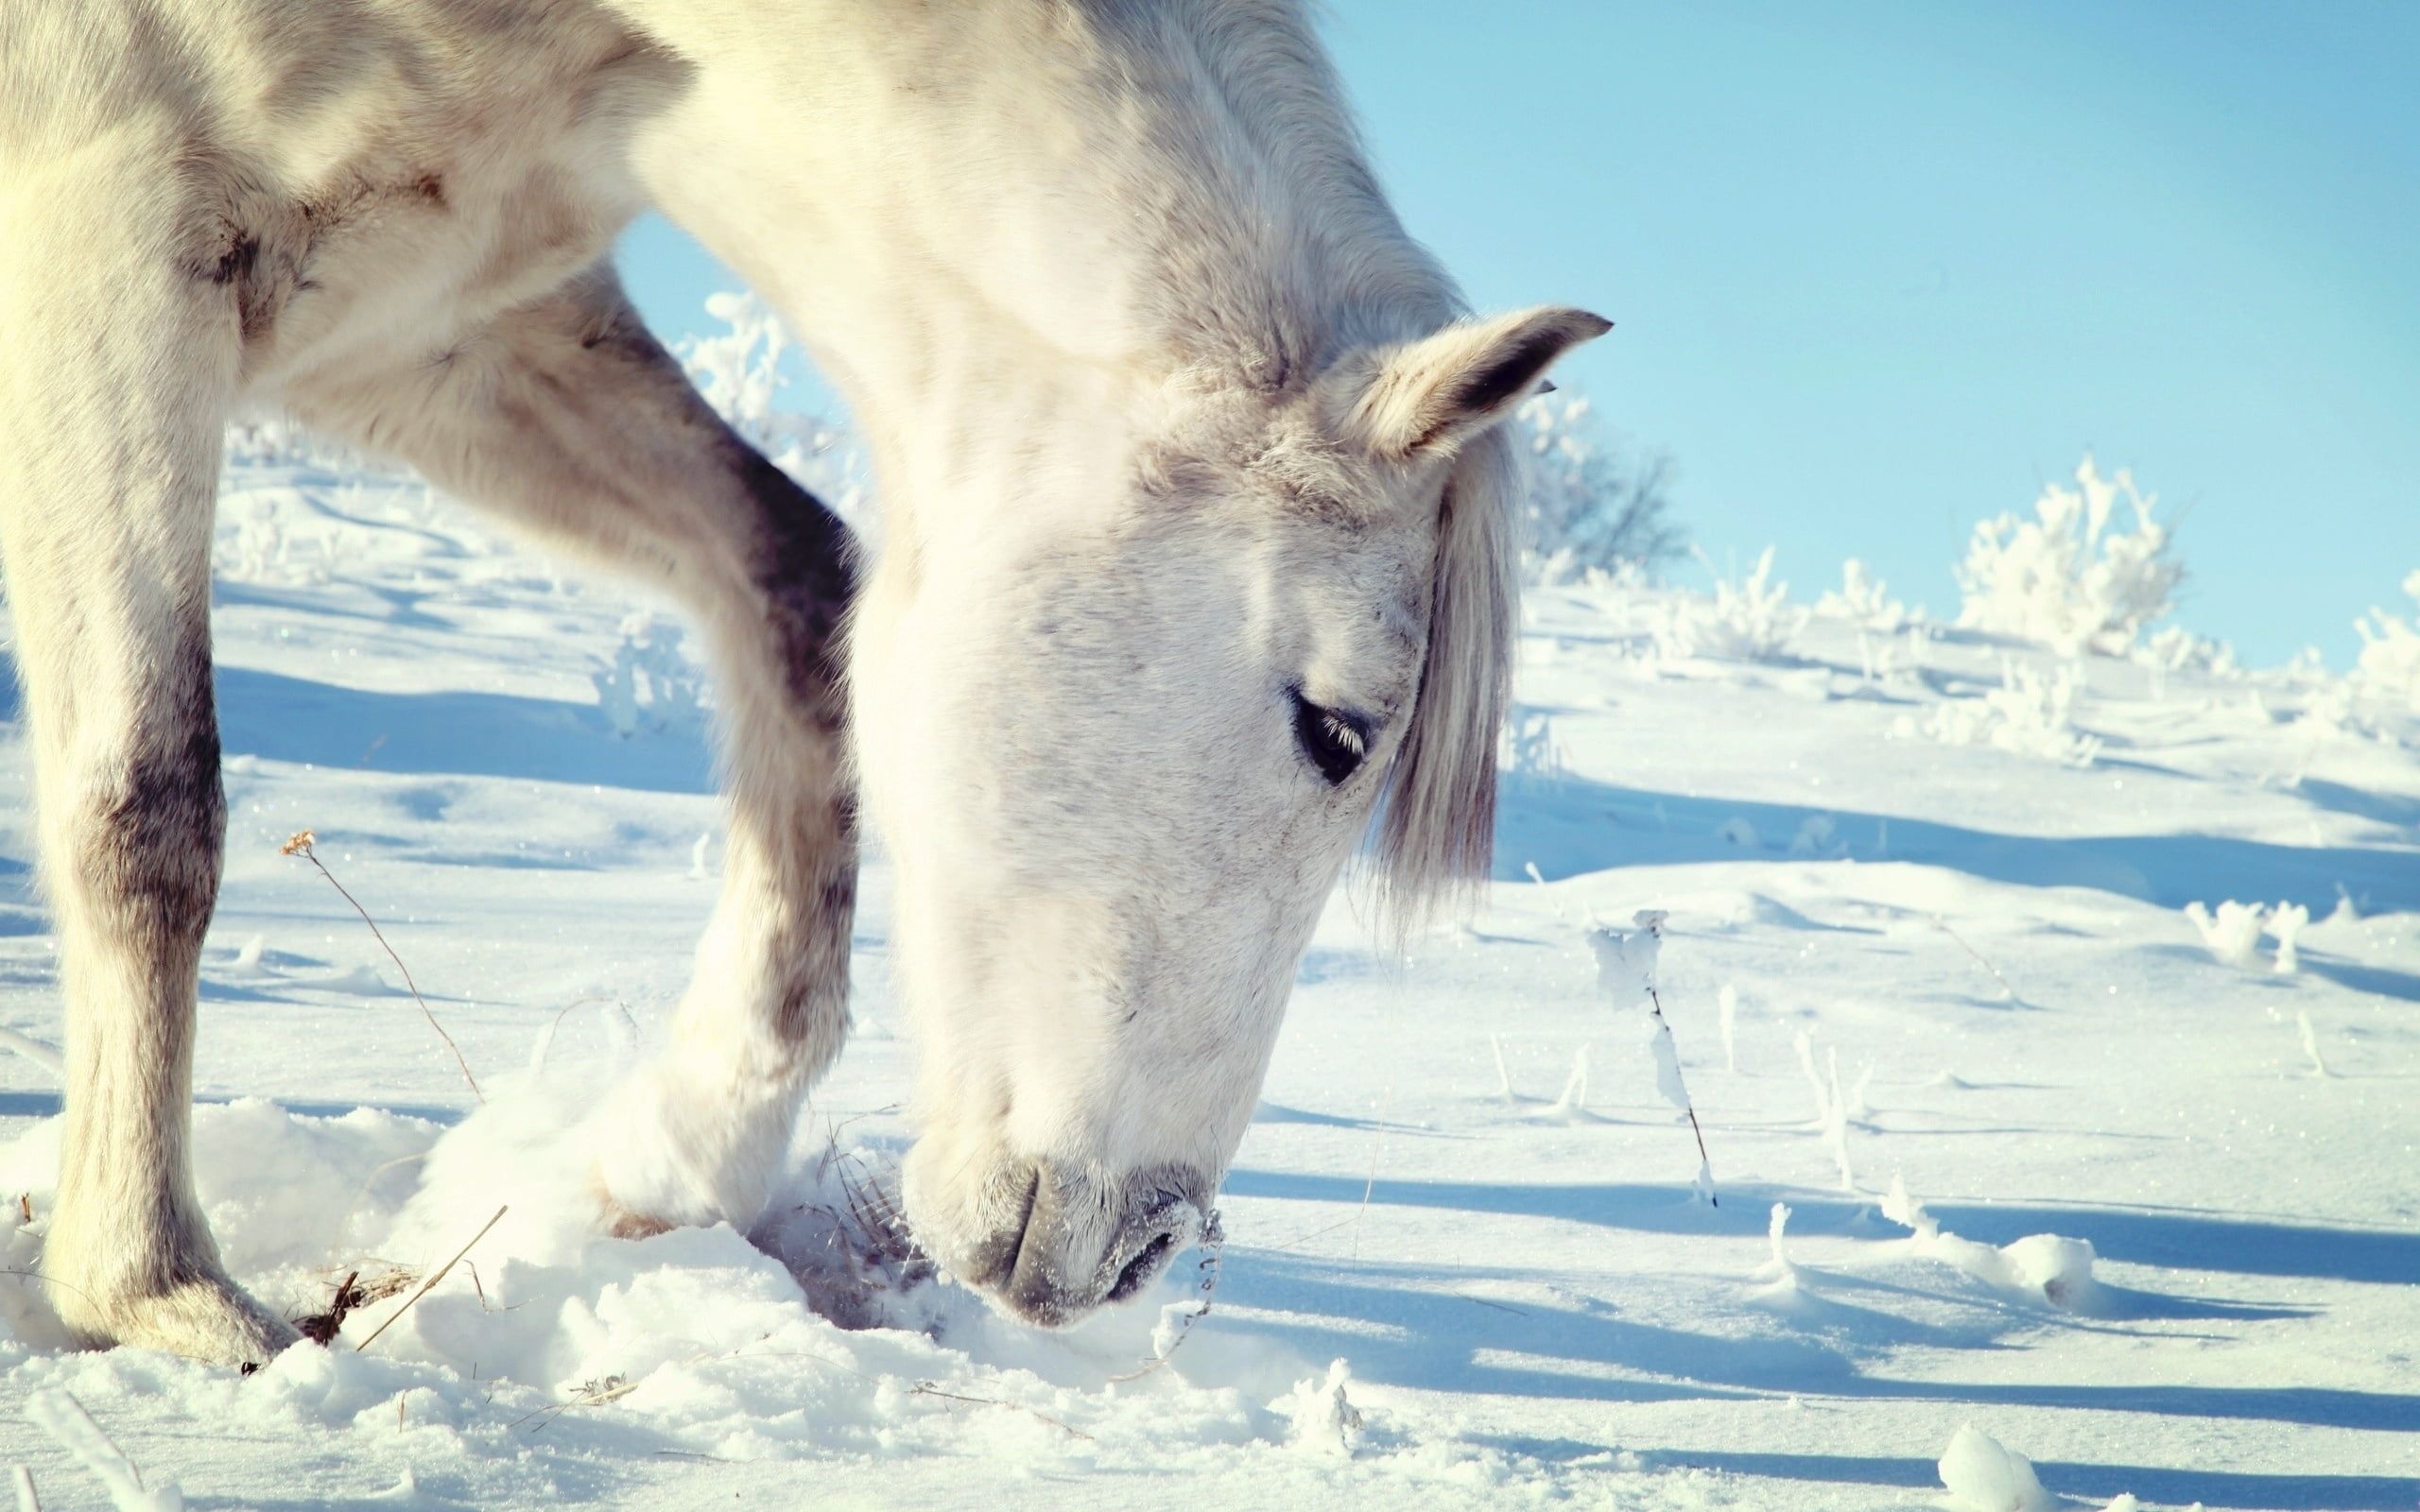 Horses in the Snow, Winter corral, Equine beauty, 2560x1600 HD Desktop